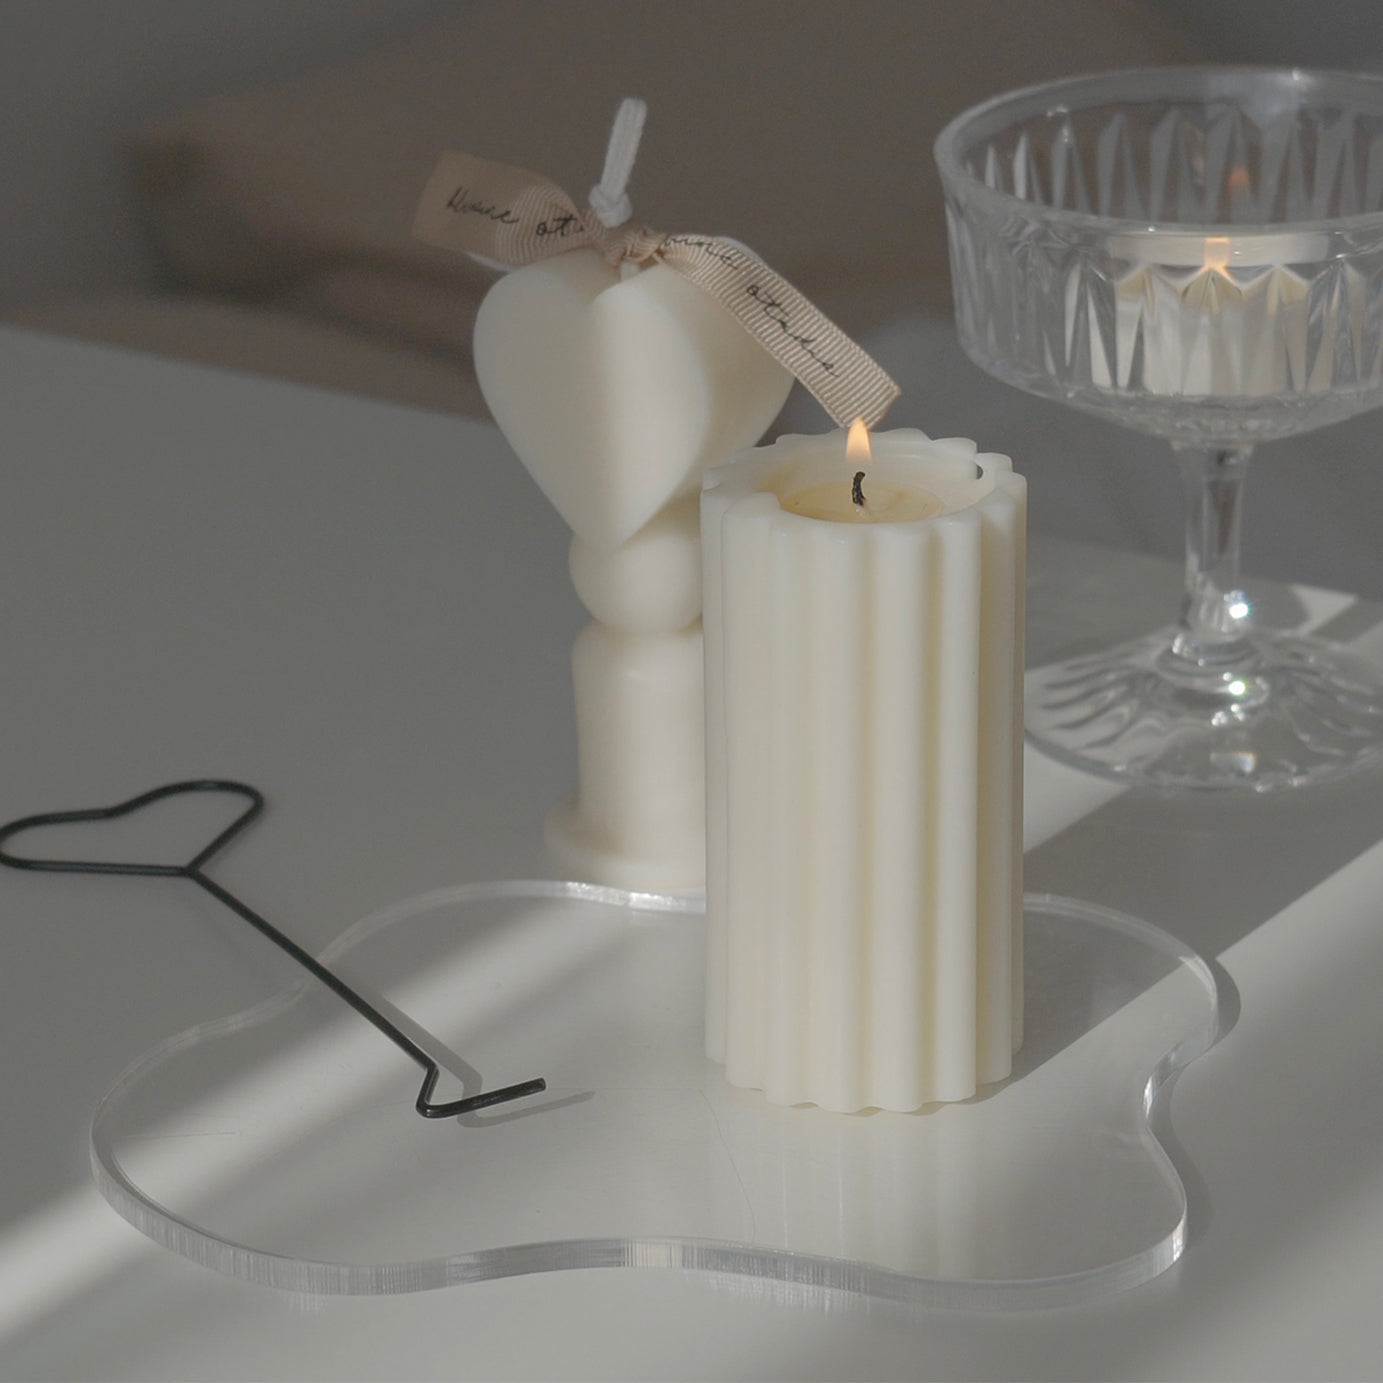 Heart shape candle, a burning ribbed pillar candle on a clear irregular shape acrylic coaster with a black metal heart shaped wick dipper, and a lit tealight candle in a glass coupe are placed on white drawer. The arrangement exudes minimal aesthetic dreamy vibes.